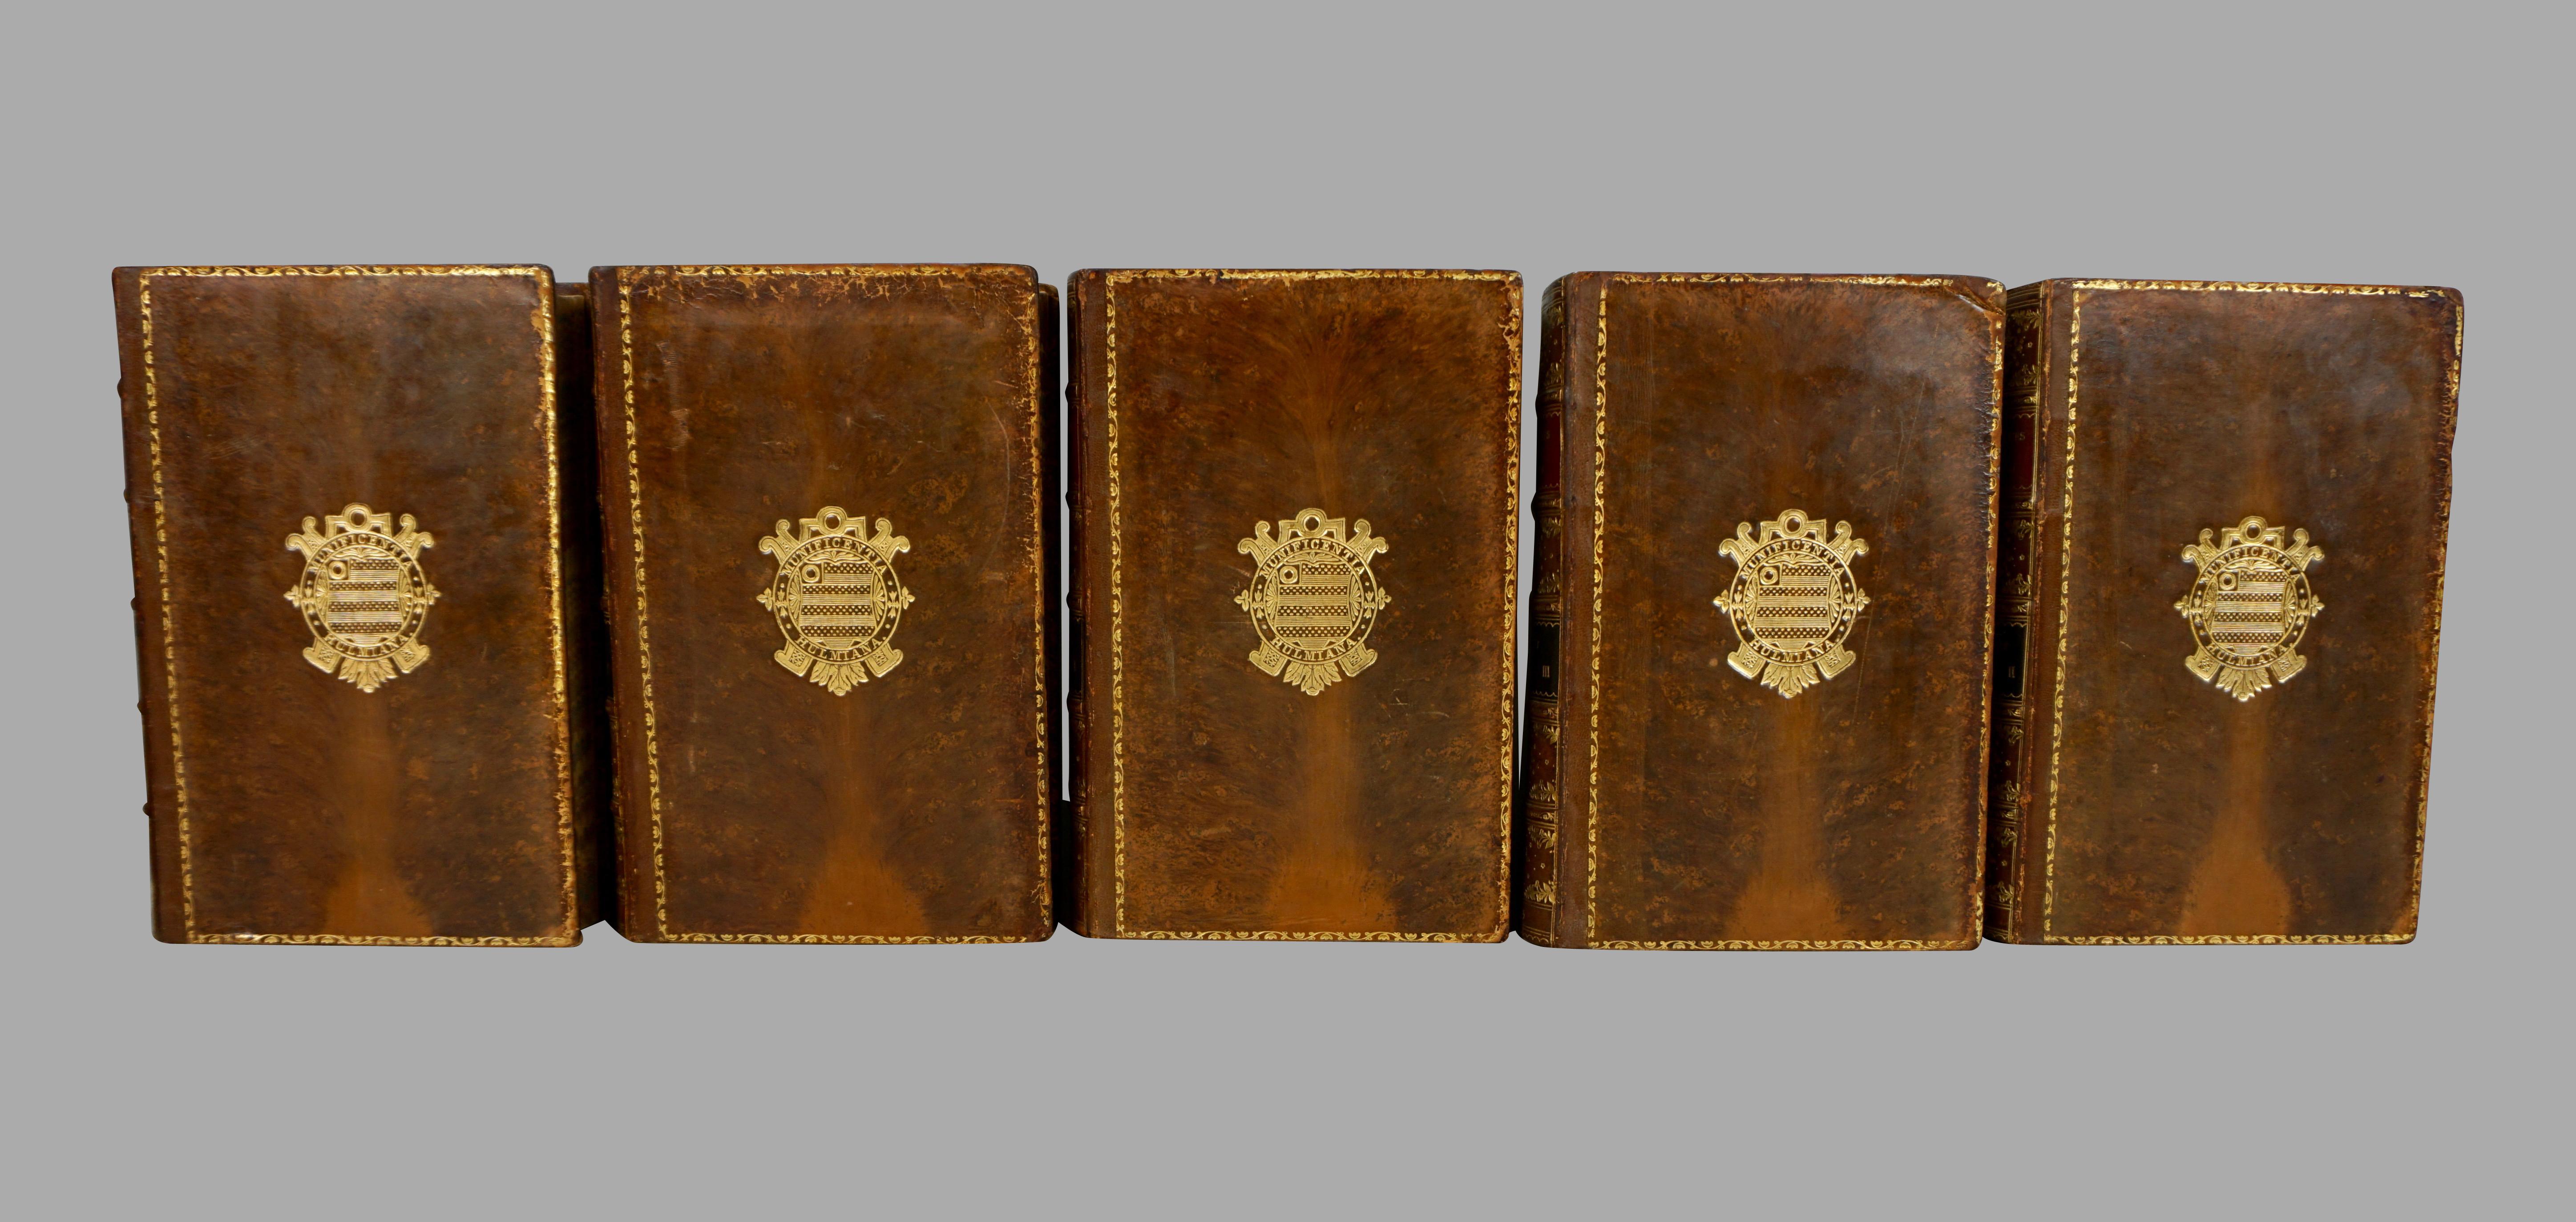 The dialogues of Plato edited by B. Jowett, second edition, published Oxford by Macmillan and Company in 5 full tree calf leather bindings with gilt tooled decoration. This is a beautiful edition of a classic work in extraordinary full leather gilt